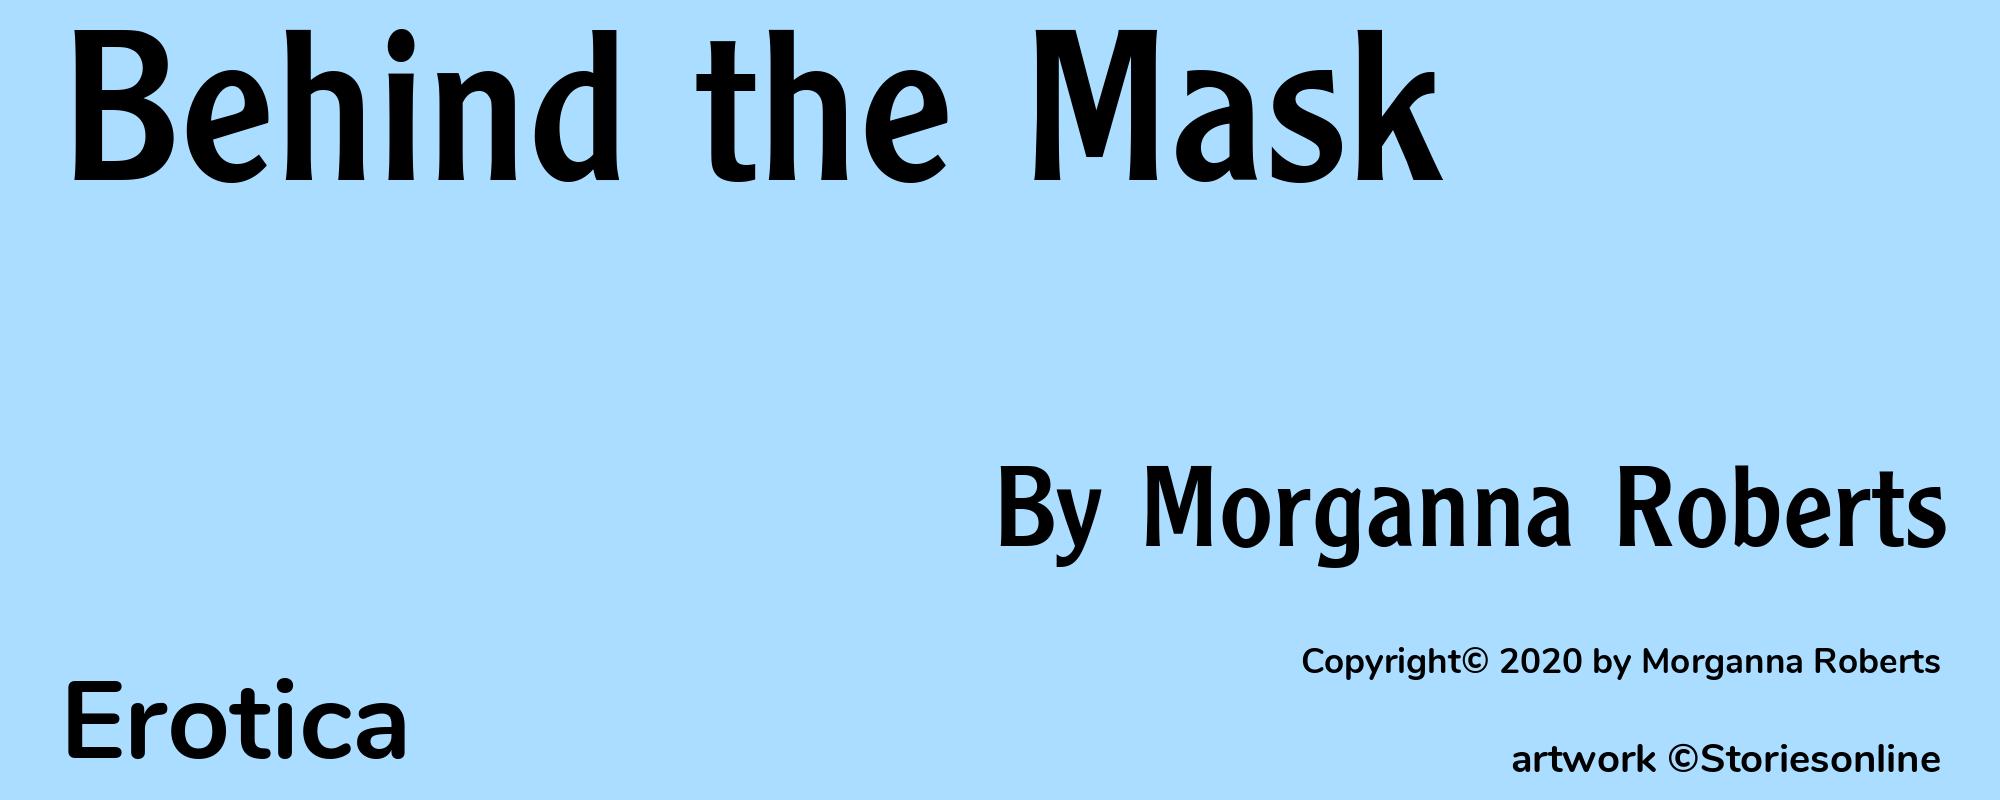 Behind the Mask - Cover